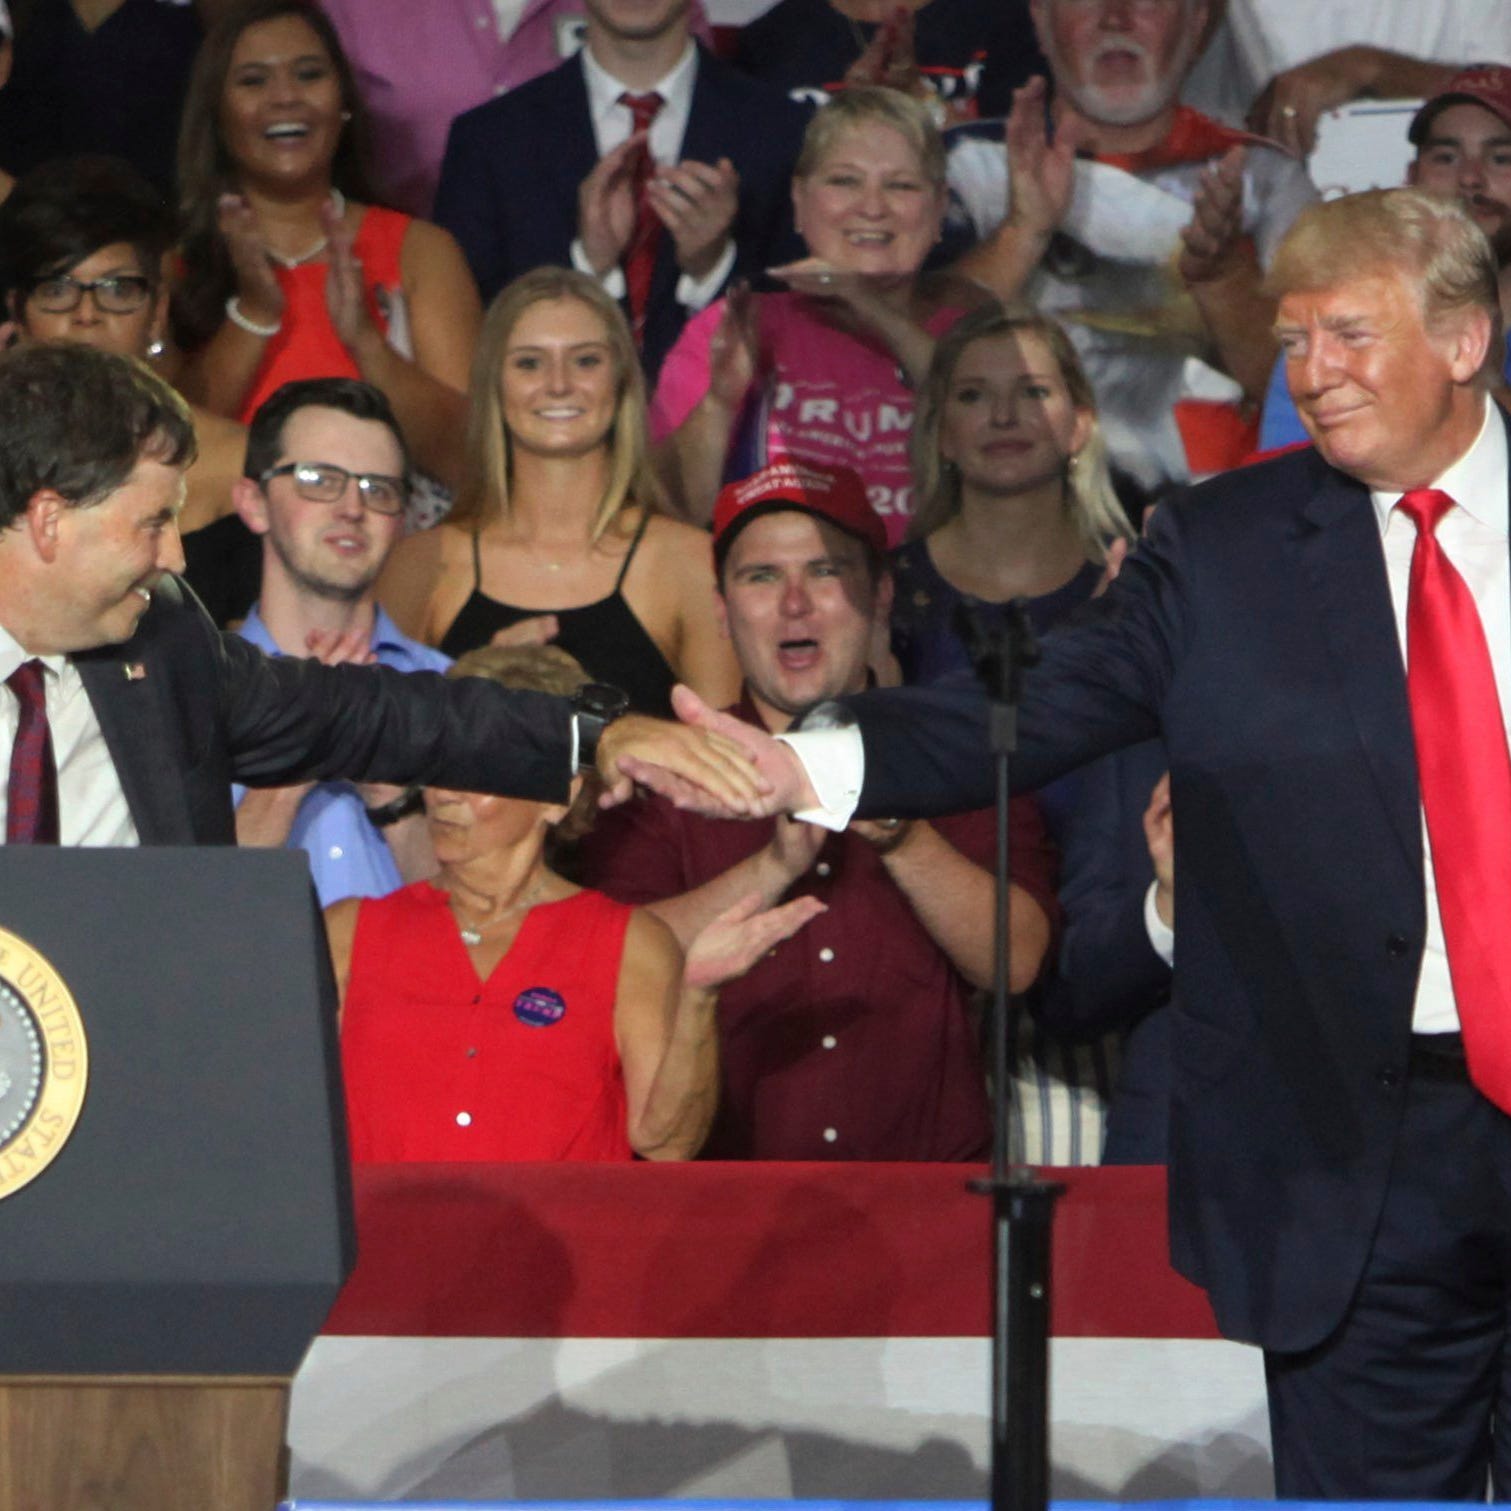 12th Congressional District Republican candidate Troy Balderson, left, shakes hands with President Donald Trump during a rally, Saturday, Aug. 4, 2018, in Lewis Center, Ohio.